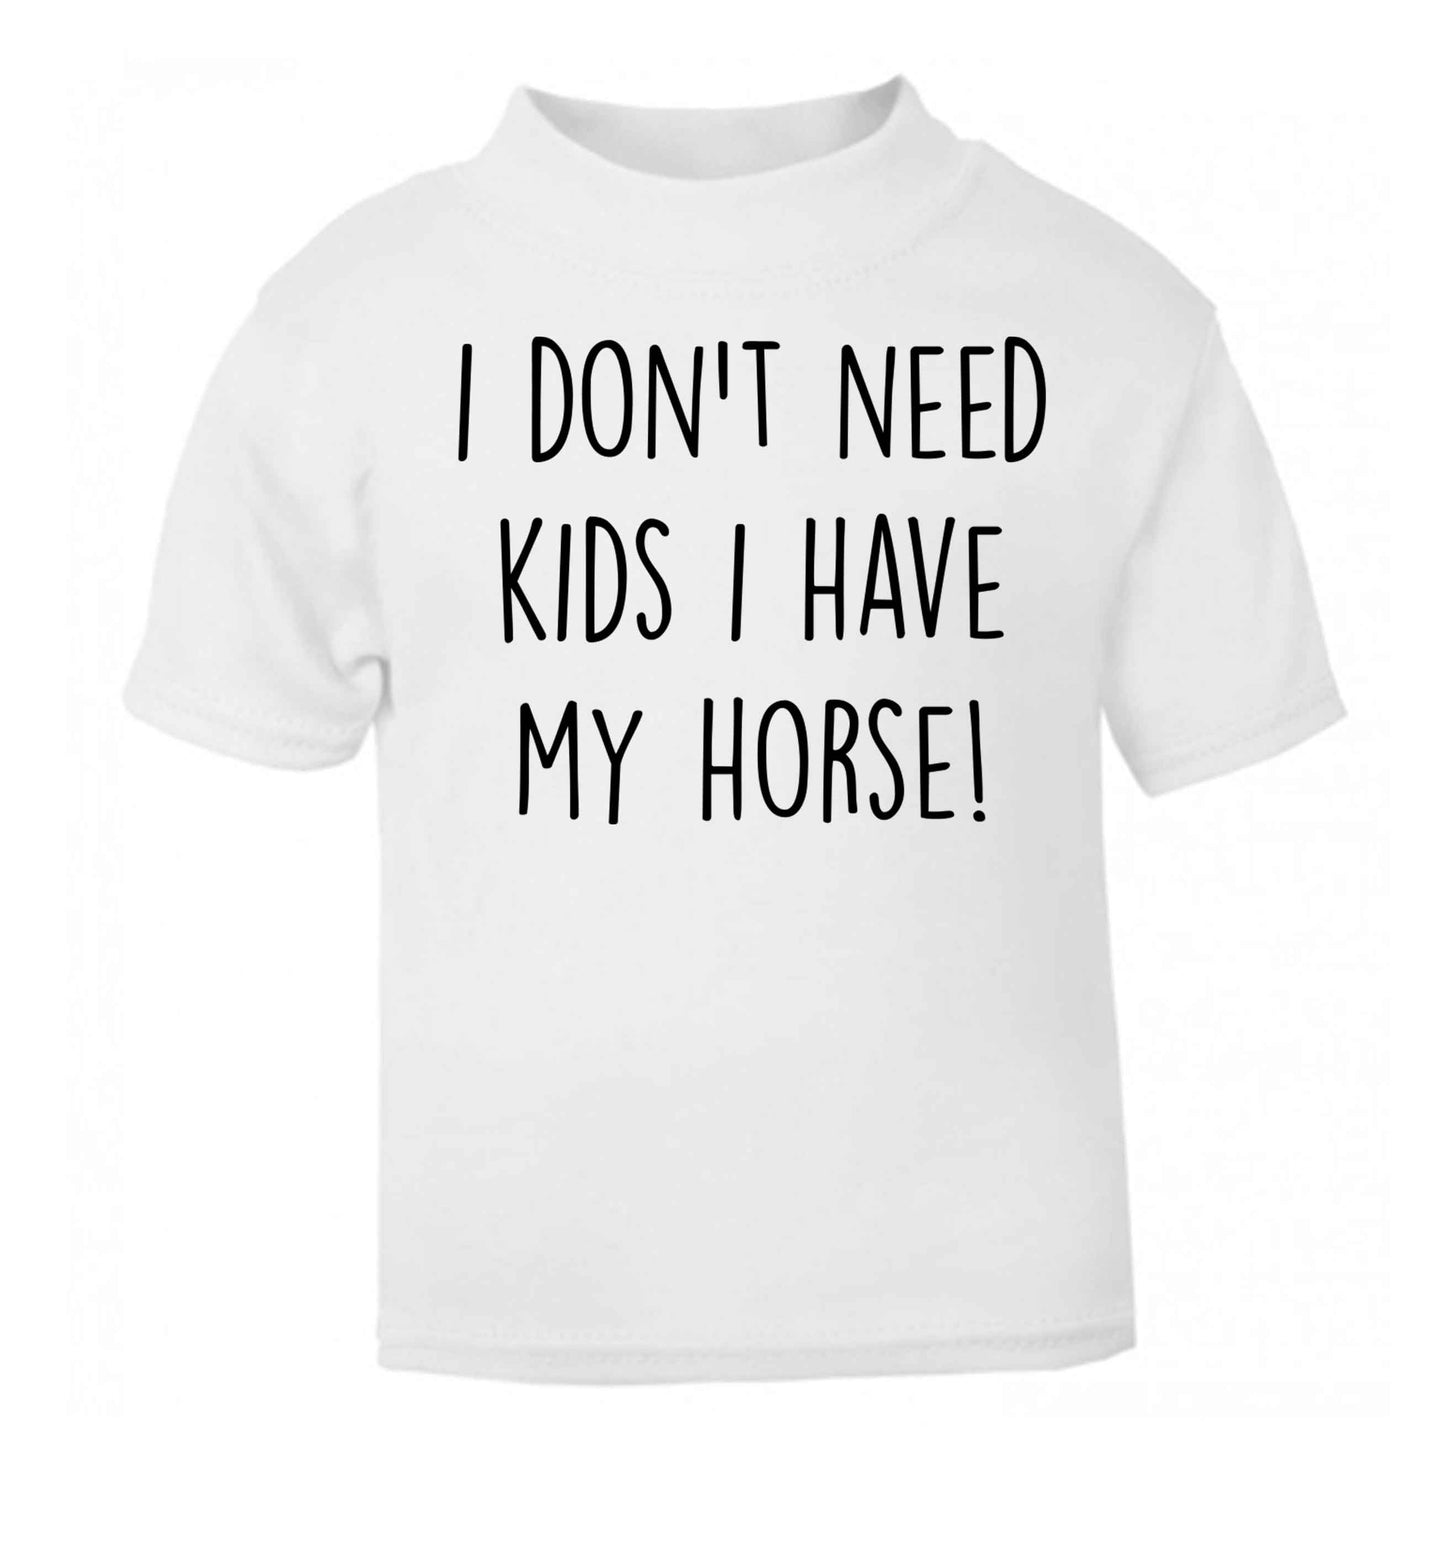 I don't need kids I have my horse white baby toddler Tshirt 2 Years